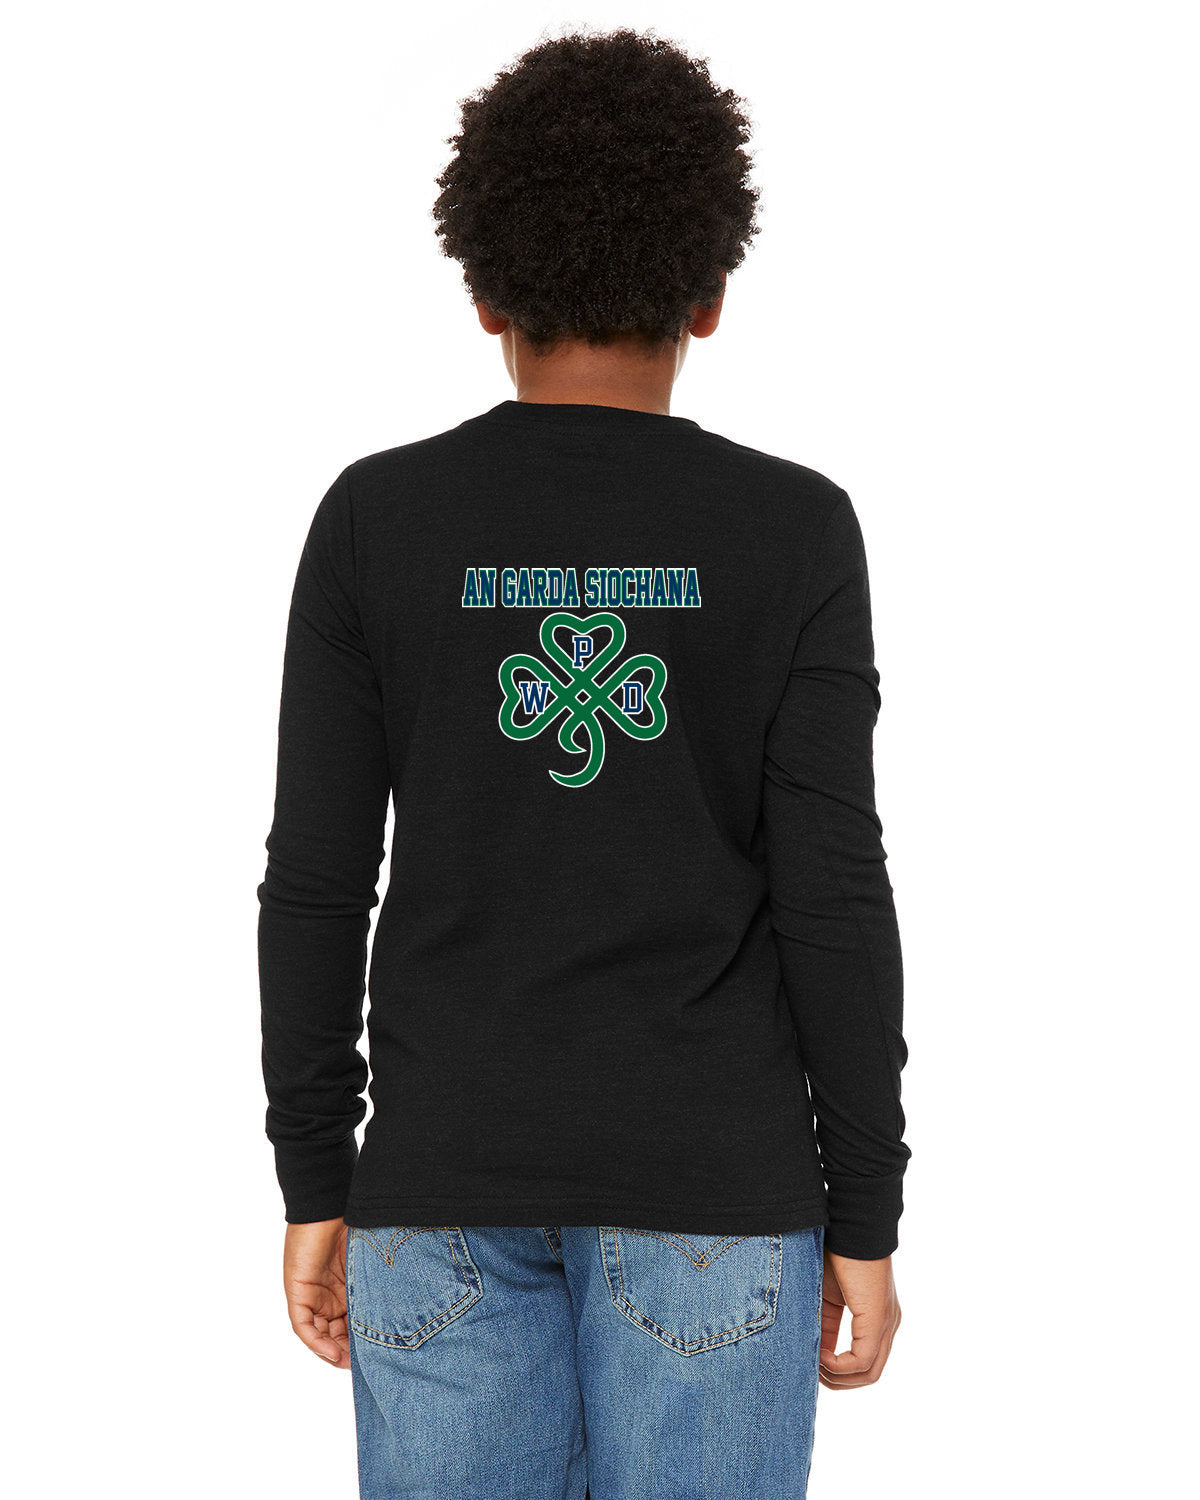 Walpole PD St. Patrick's Day 2024 LC Badge - Bella + Canvas Youth Heather Jersey Long-Sleeve T-Shirt - 3501Y